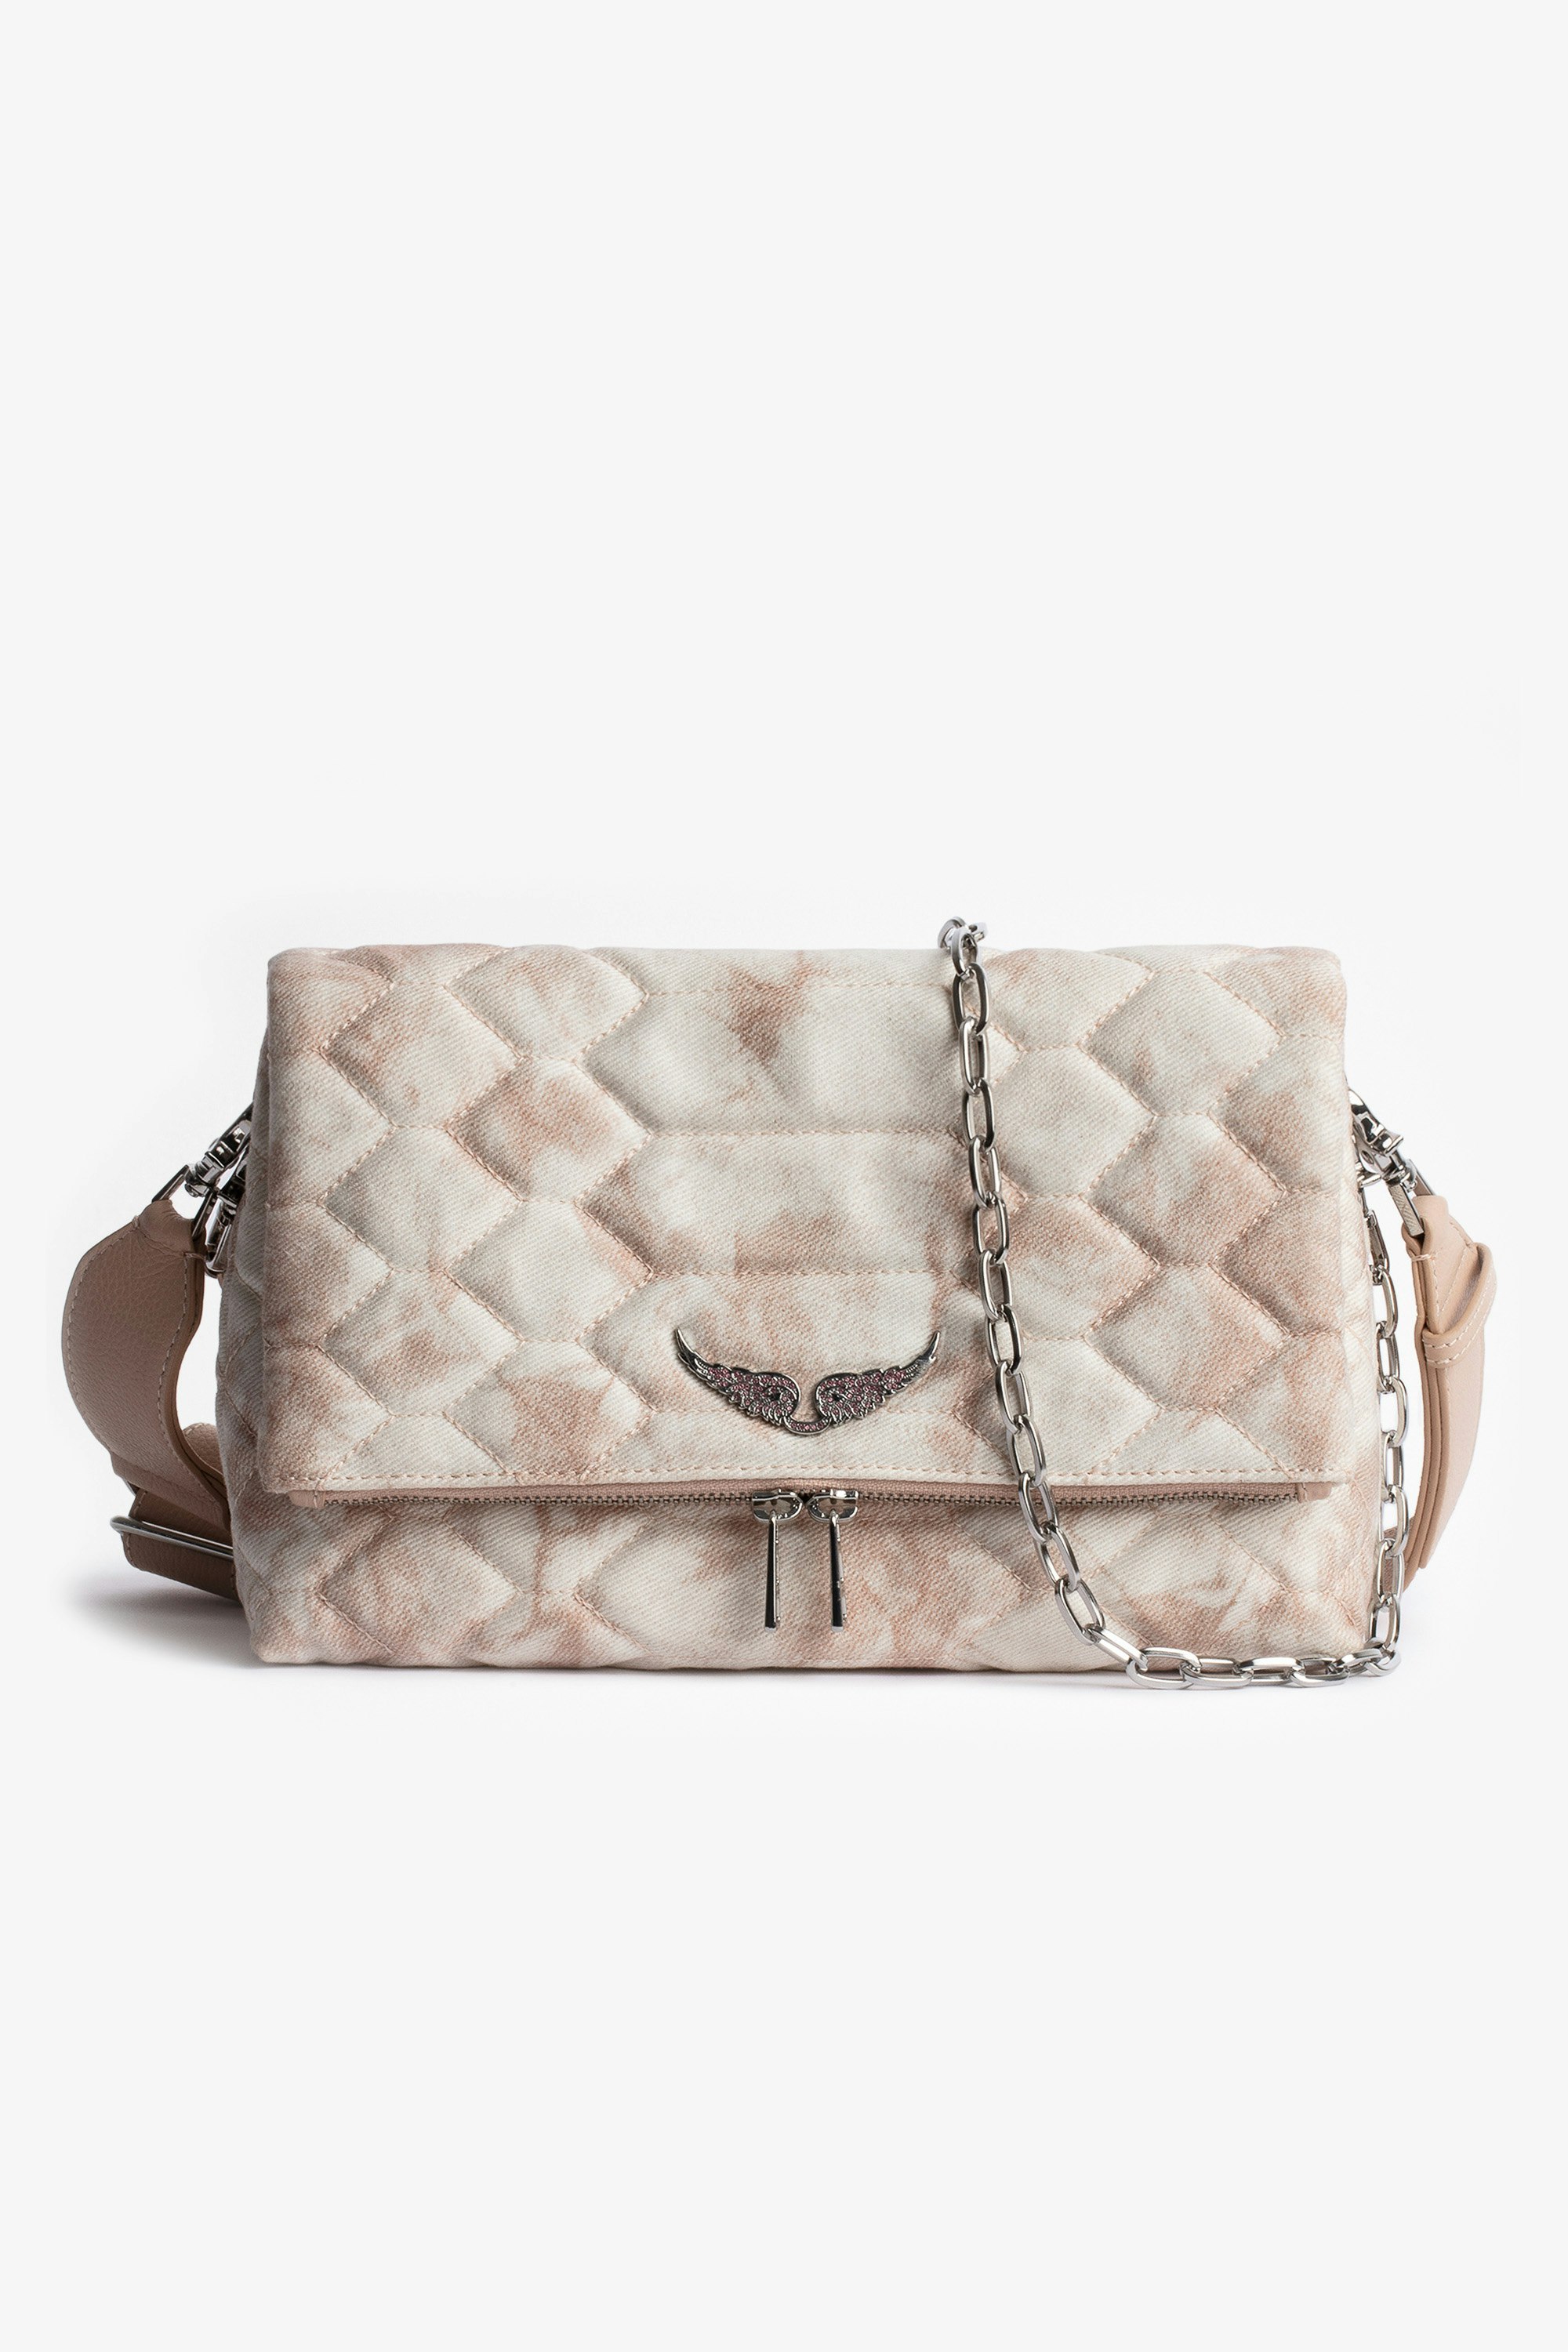 Rocky bag Women's quilted and faded ecru clutch bag